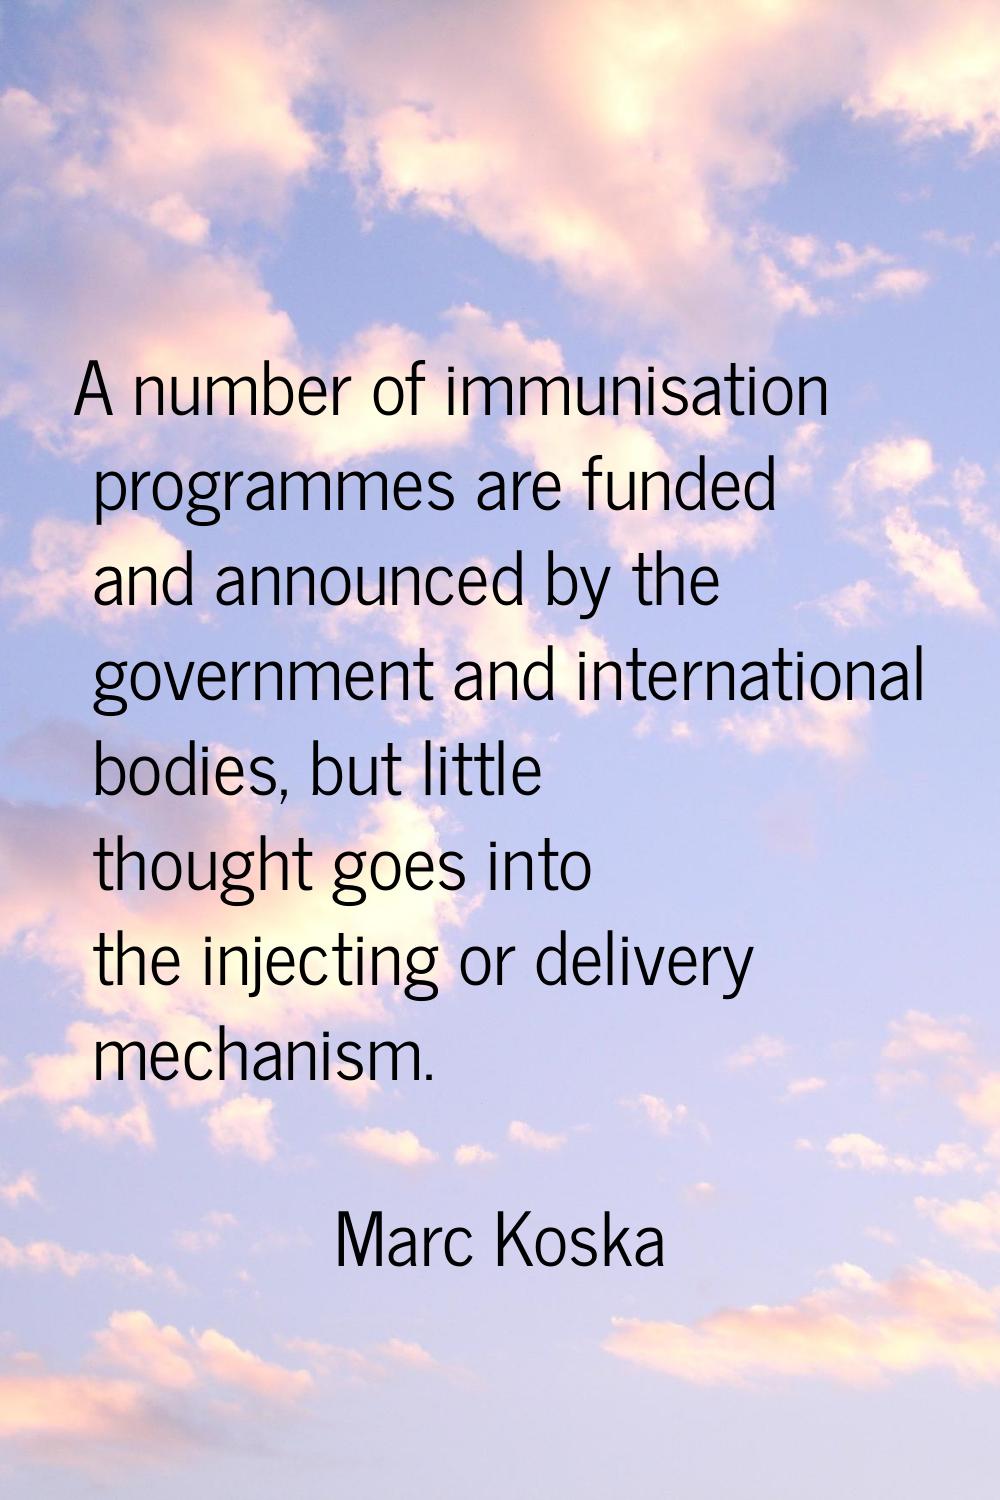 A number of immunisation programmes are funded and announced by the government and international bo